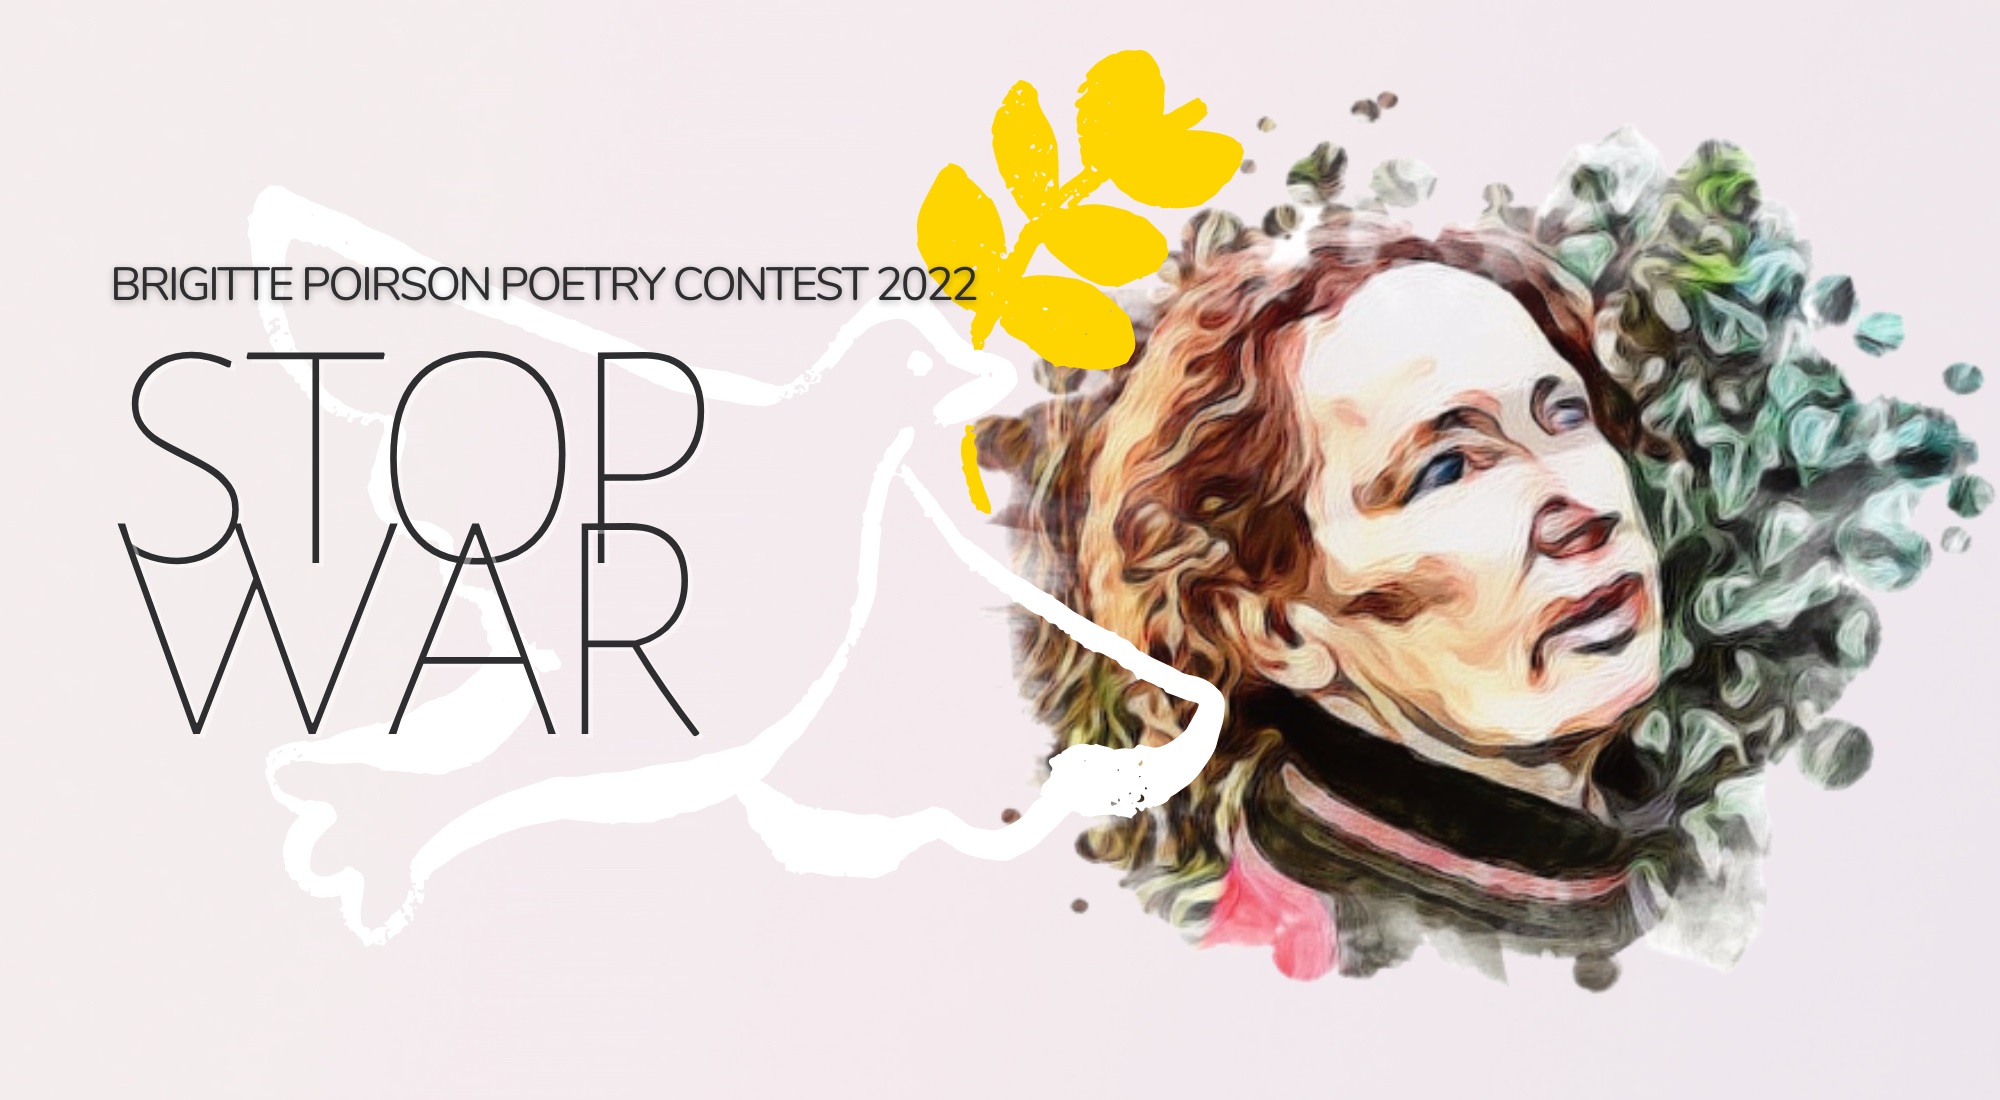 CALL FOR SUBMISSIONS: BRIGITTE POIRSON POETRY CONTEST (APRIL/MAY 2022) – ‘STOP WAR’